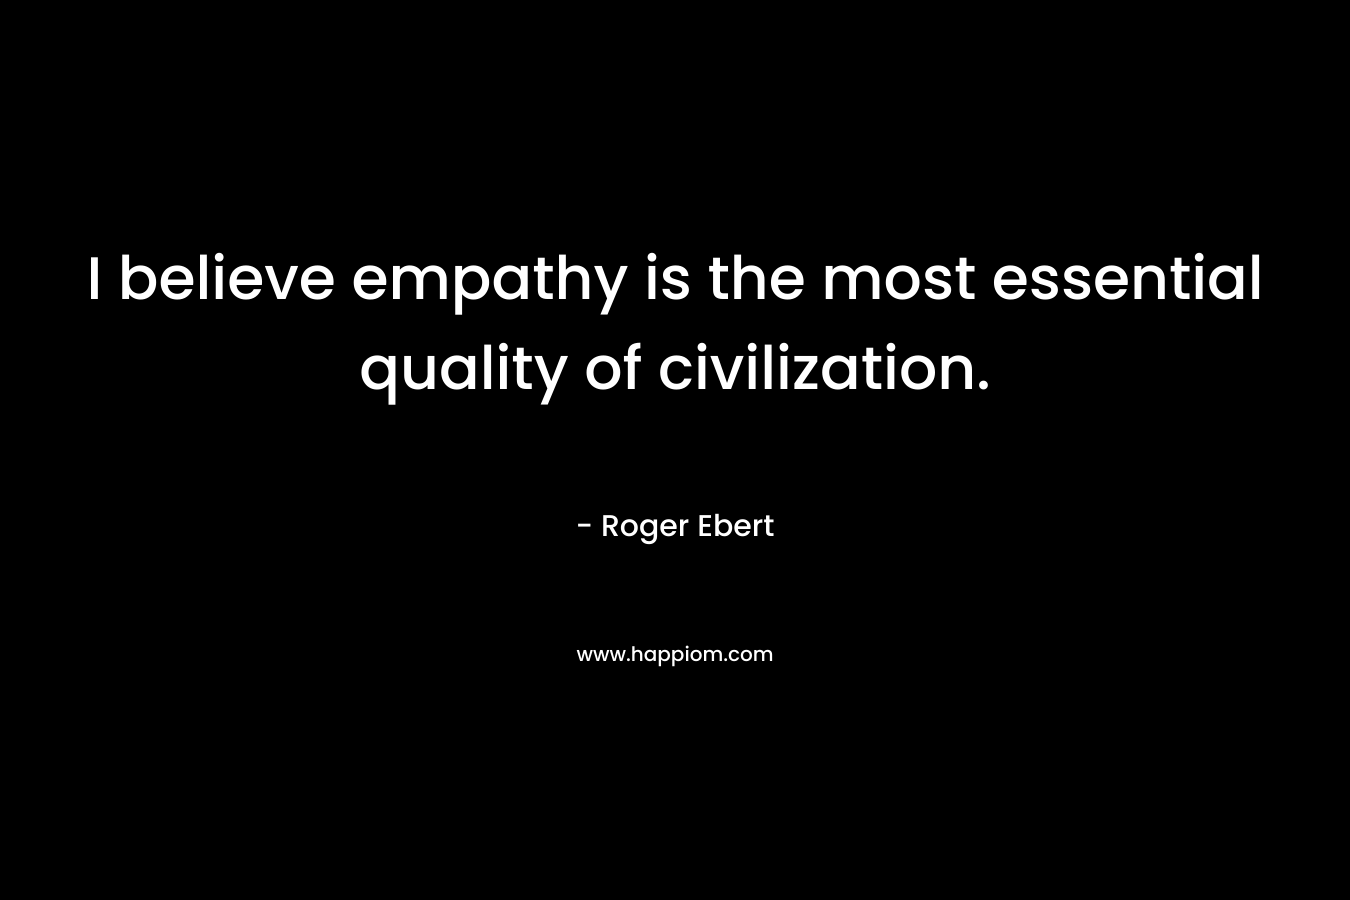 I believe empathy is the most essential quality of civilization. – Roger Ebert